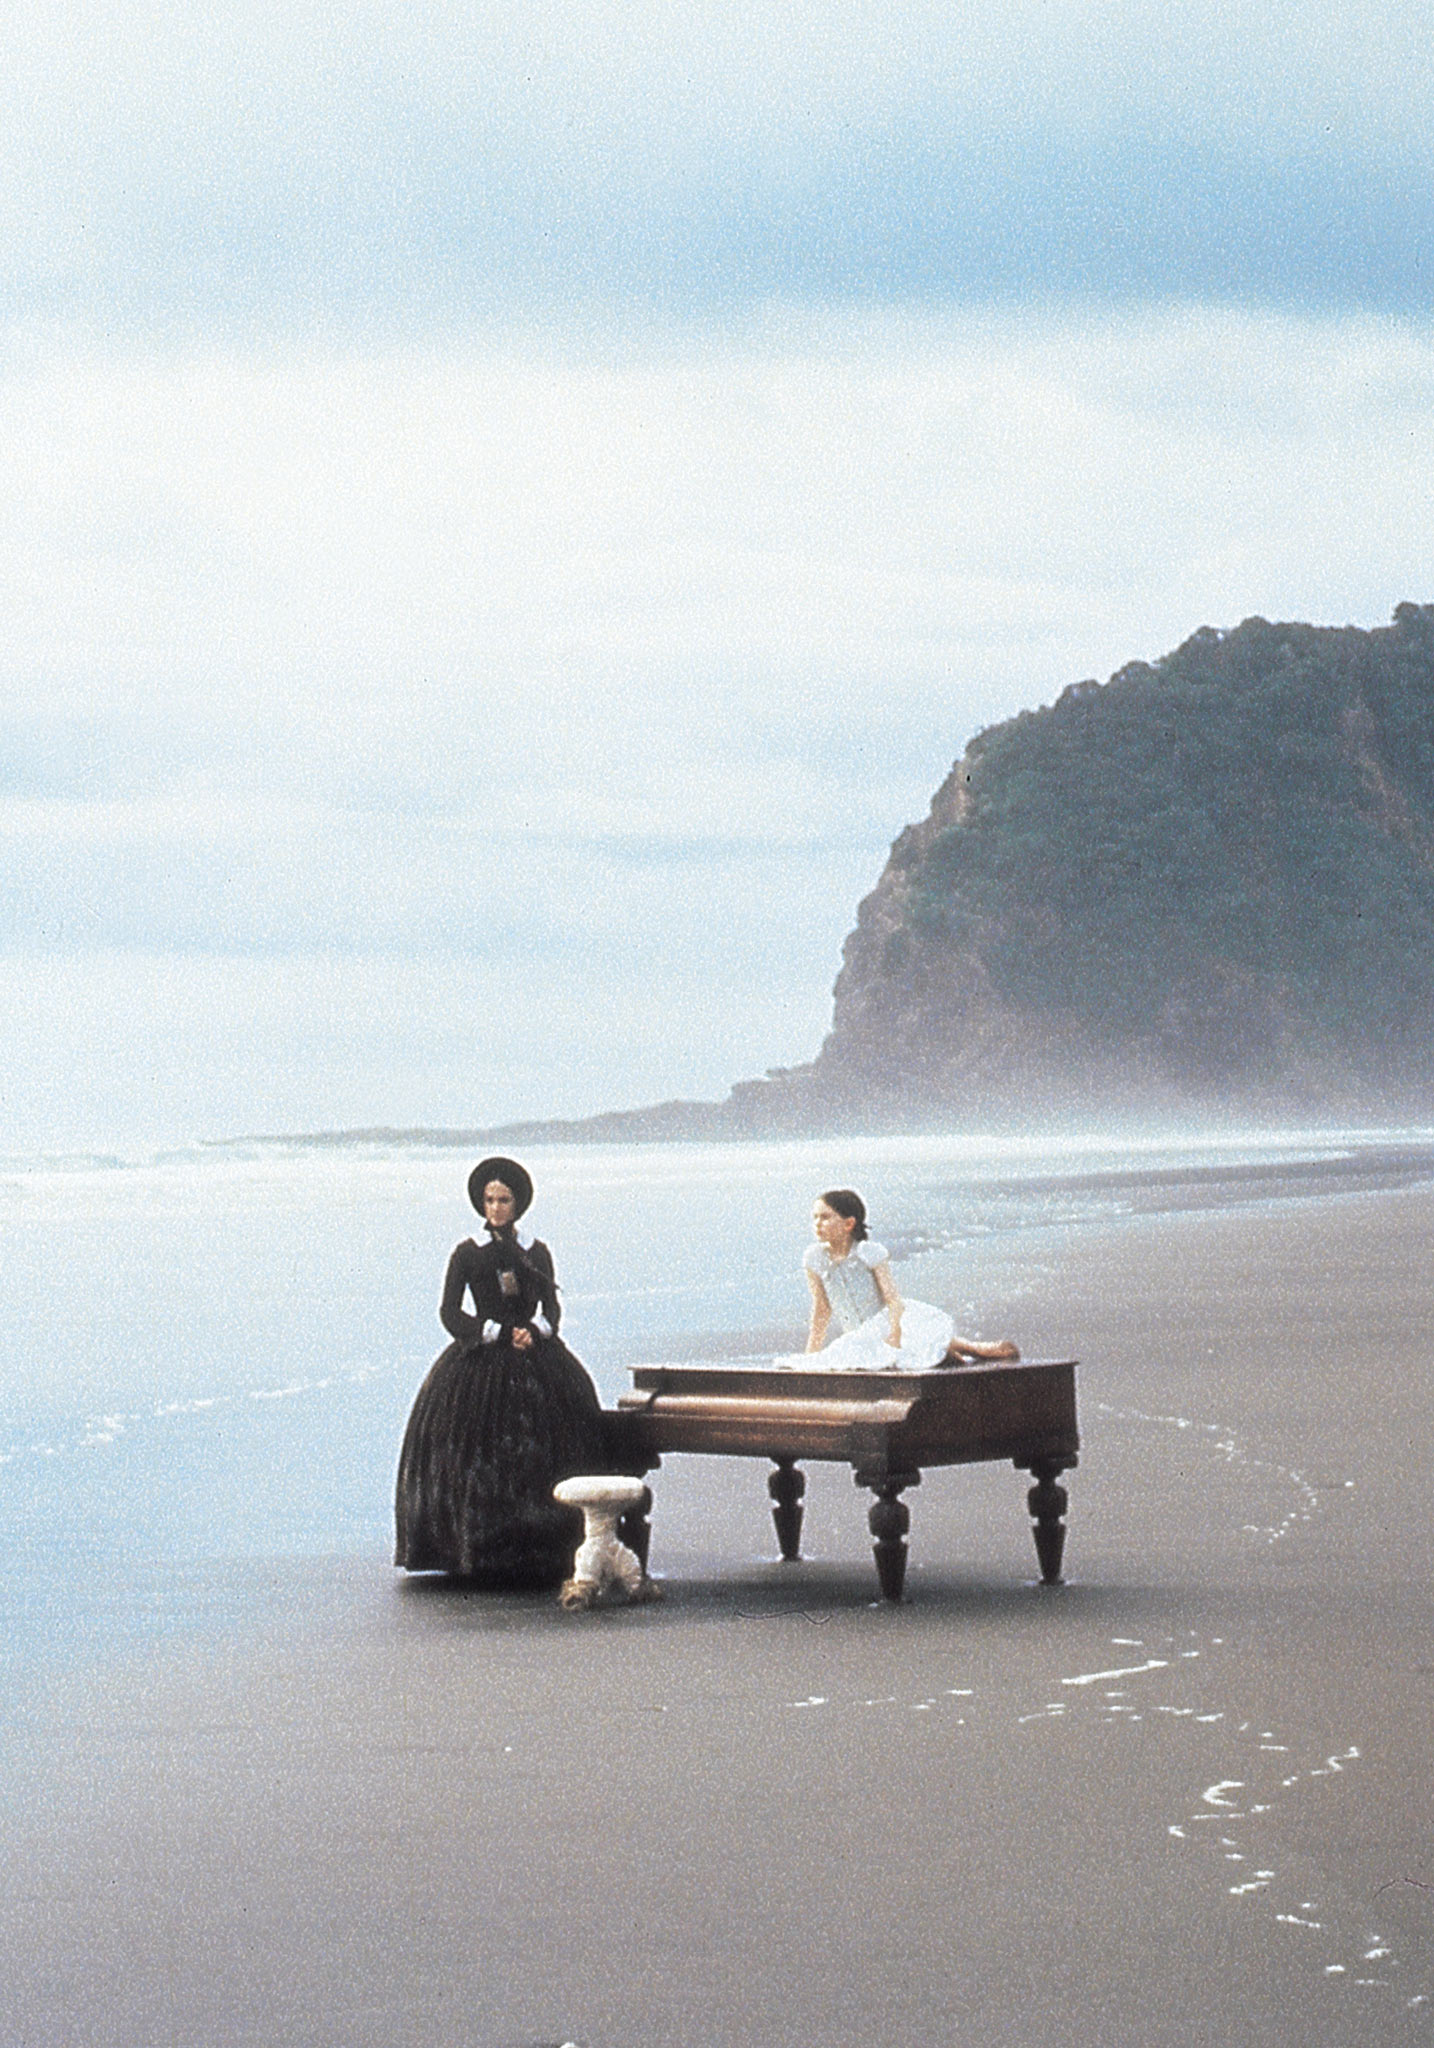 The Piano (1993) before full